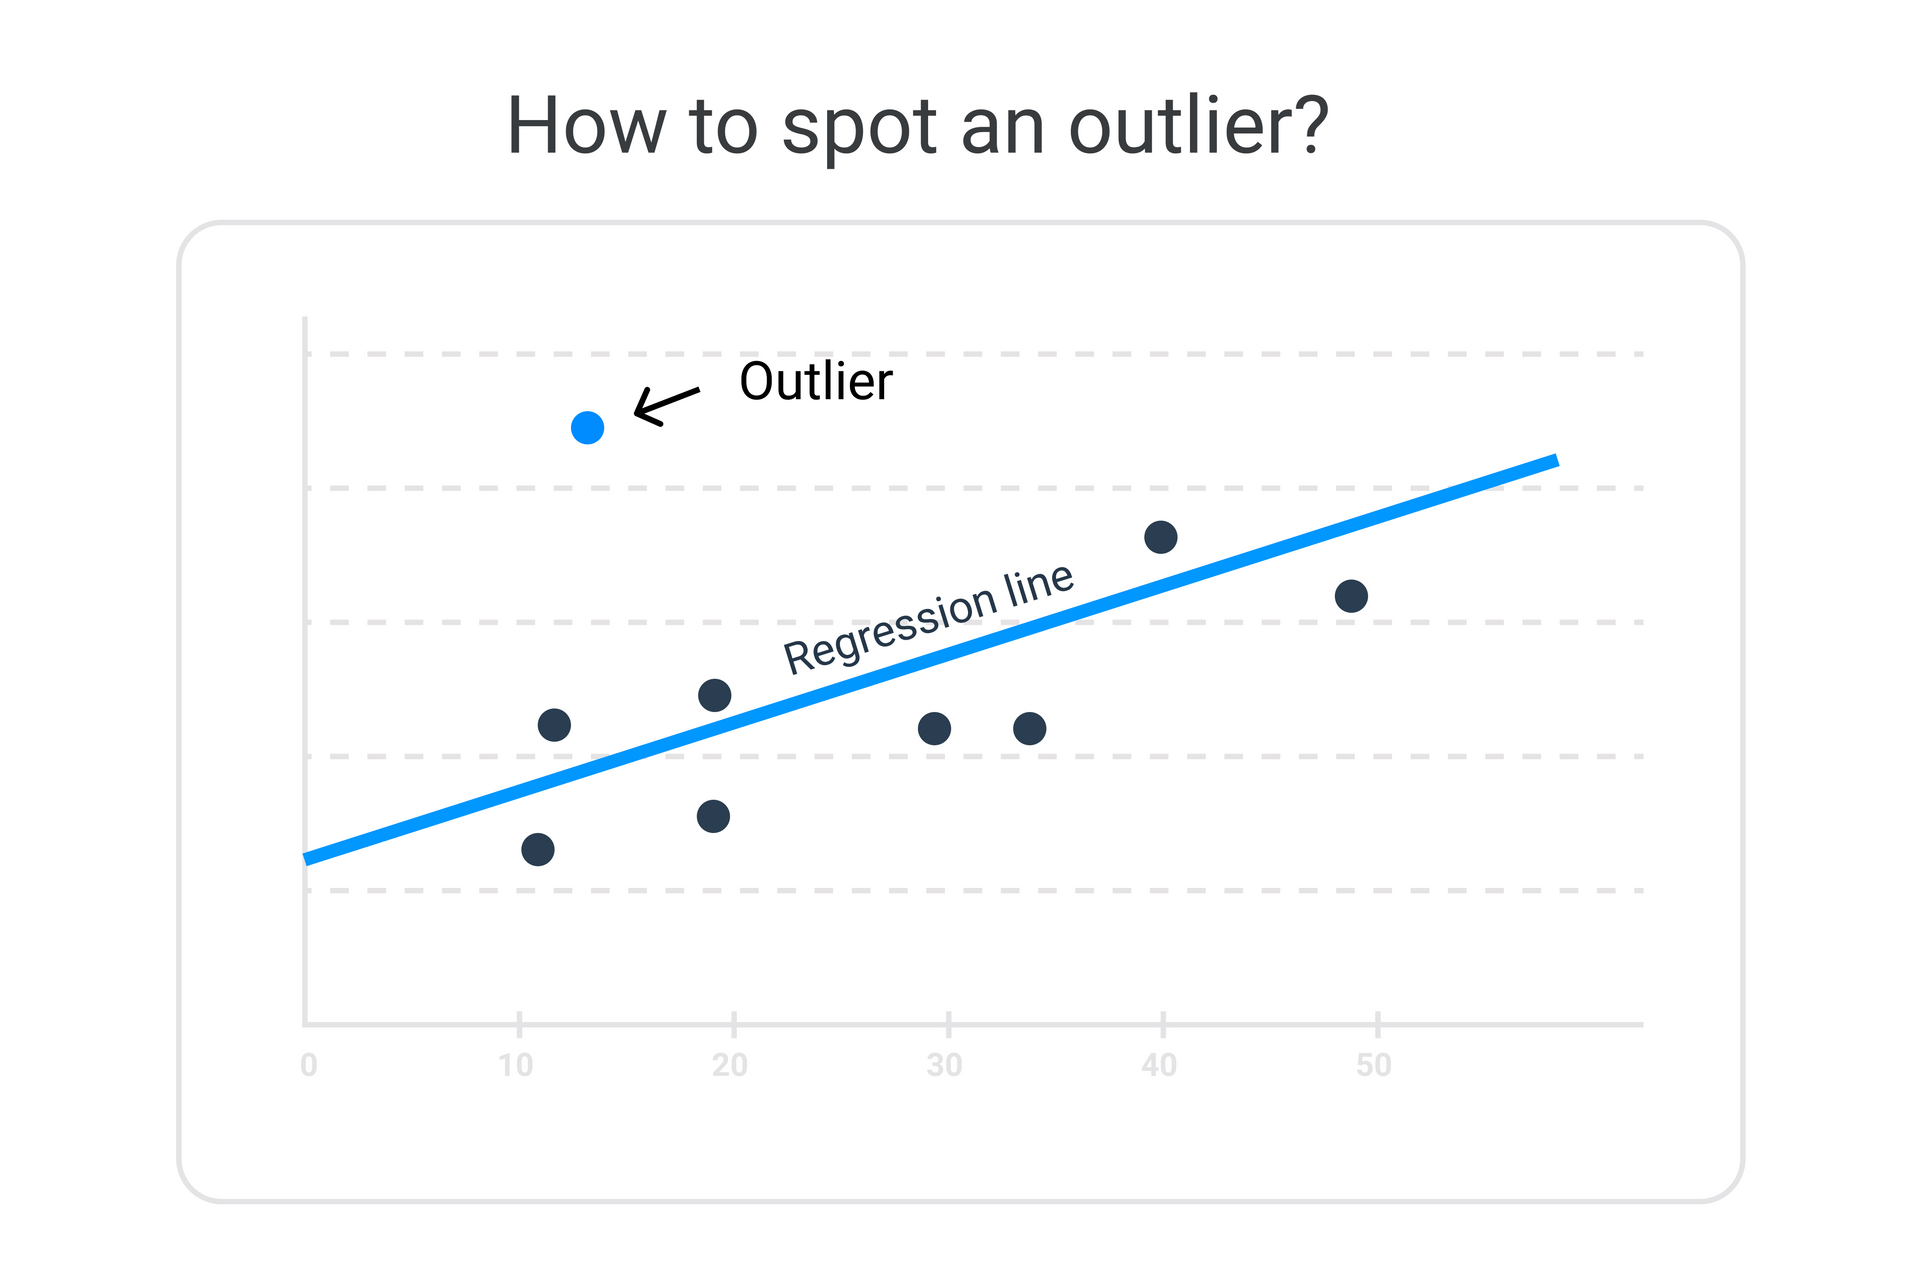 A scatter plot showing the relation between data points, with one outlier appearing further away from the regression line.